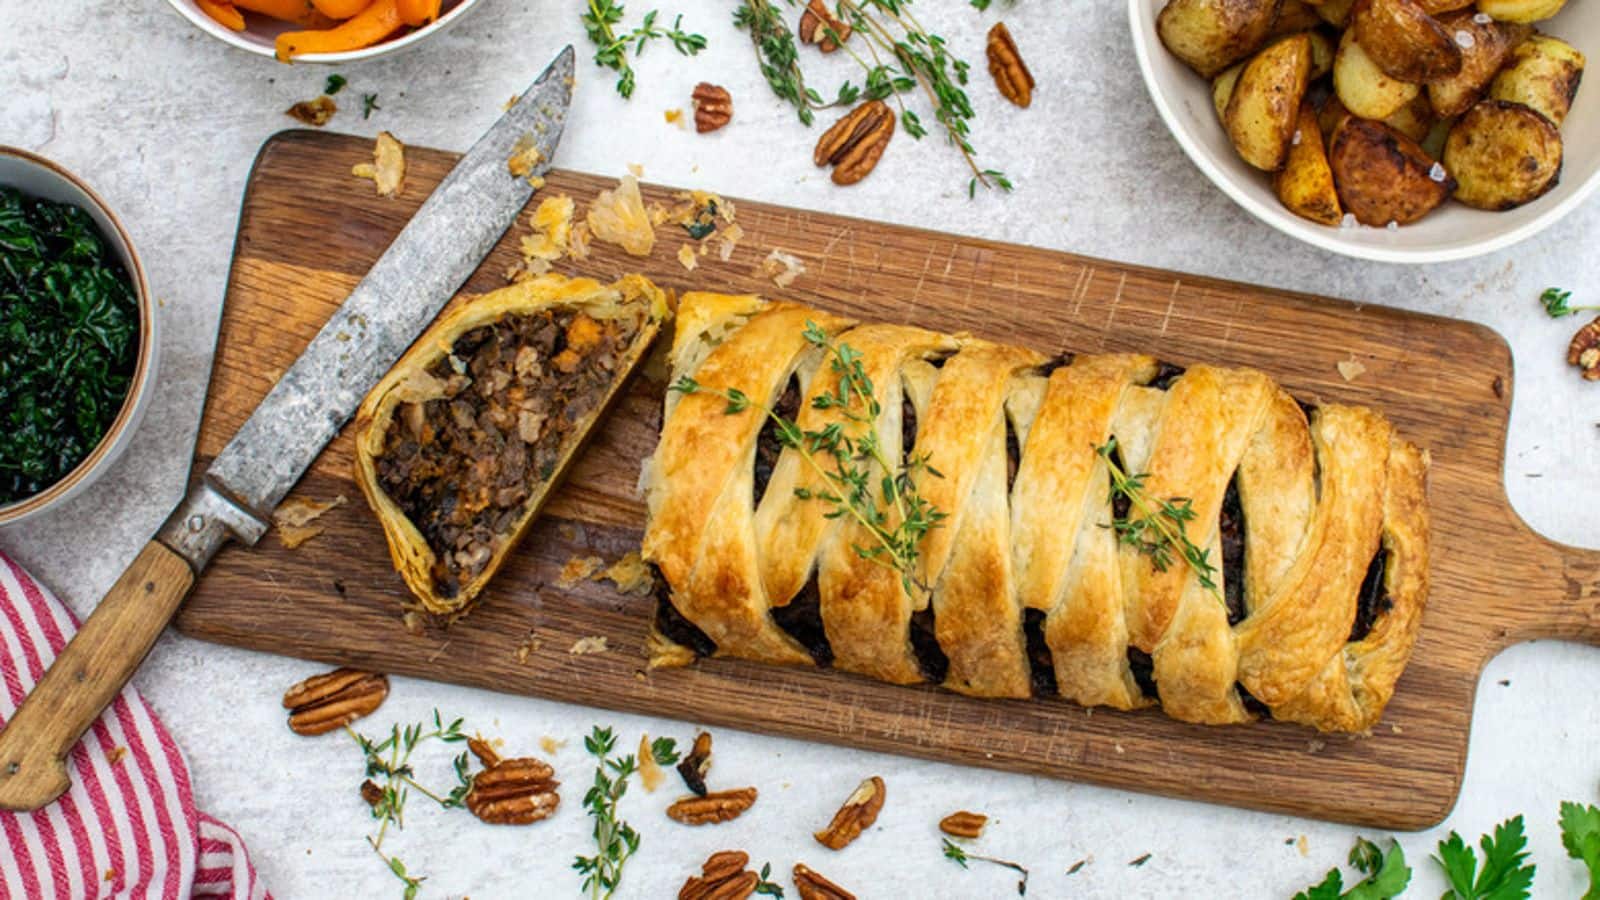 Impress your guests with this vegan mushroom wellington recipe